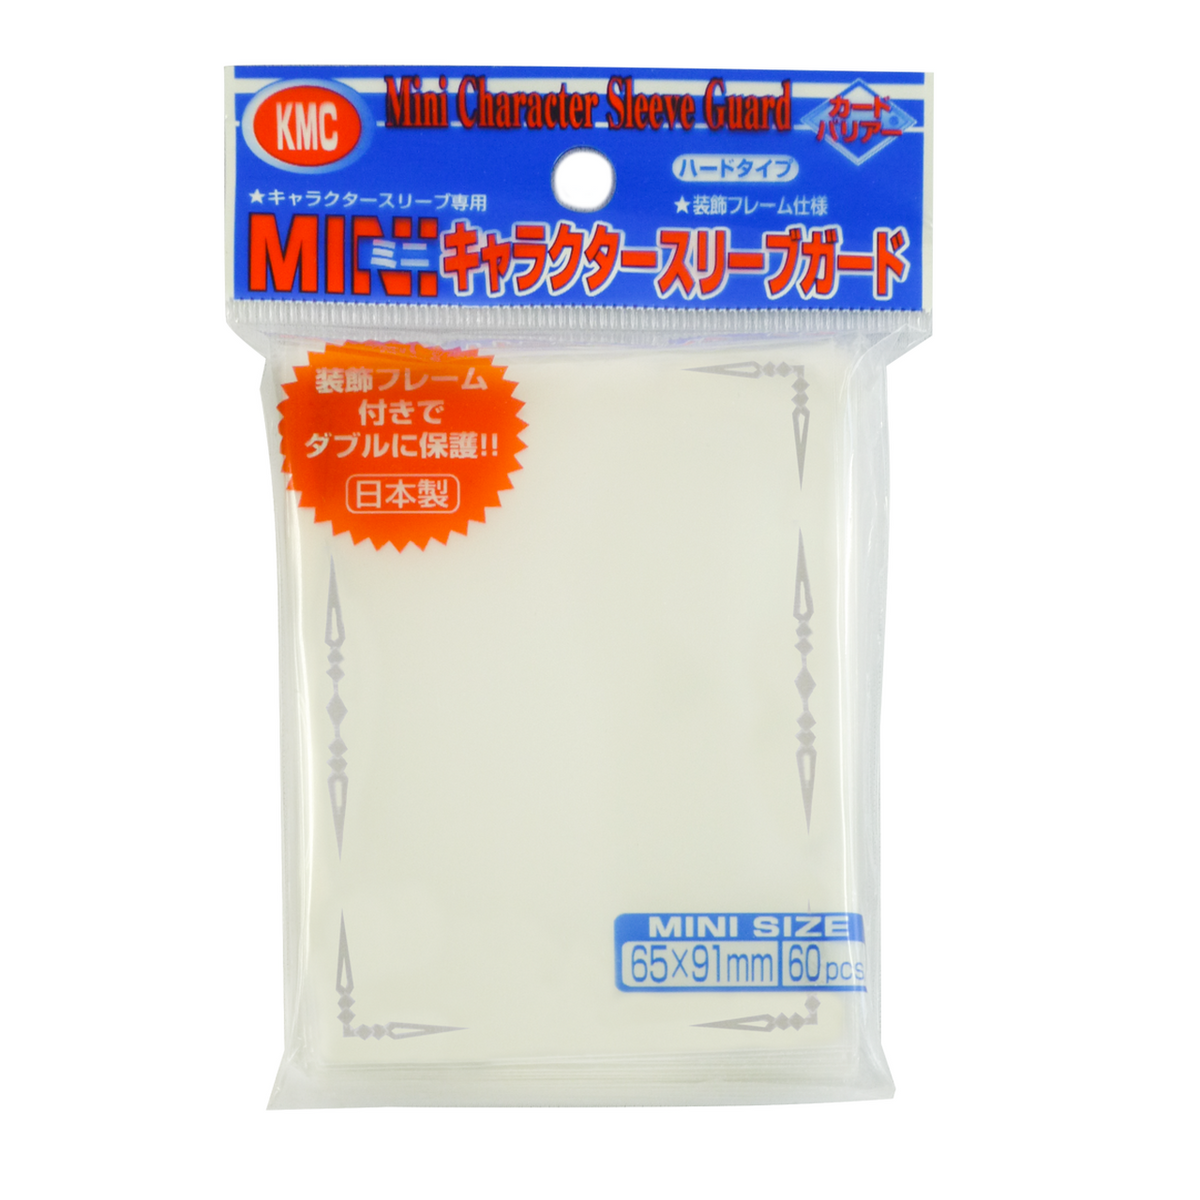 KMC Sleeve Character Sleeve Guard Mini Size 60pcs (Silver Frame)-KMC-Ace Cards &amp; Collectibles